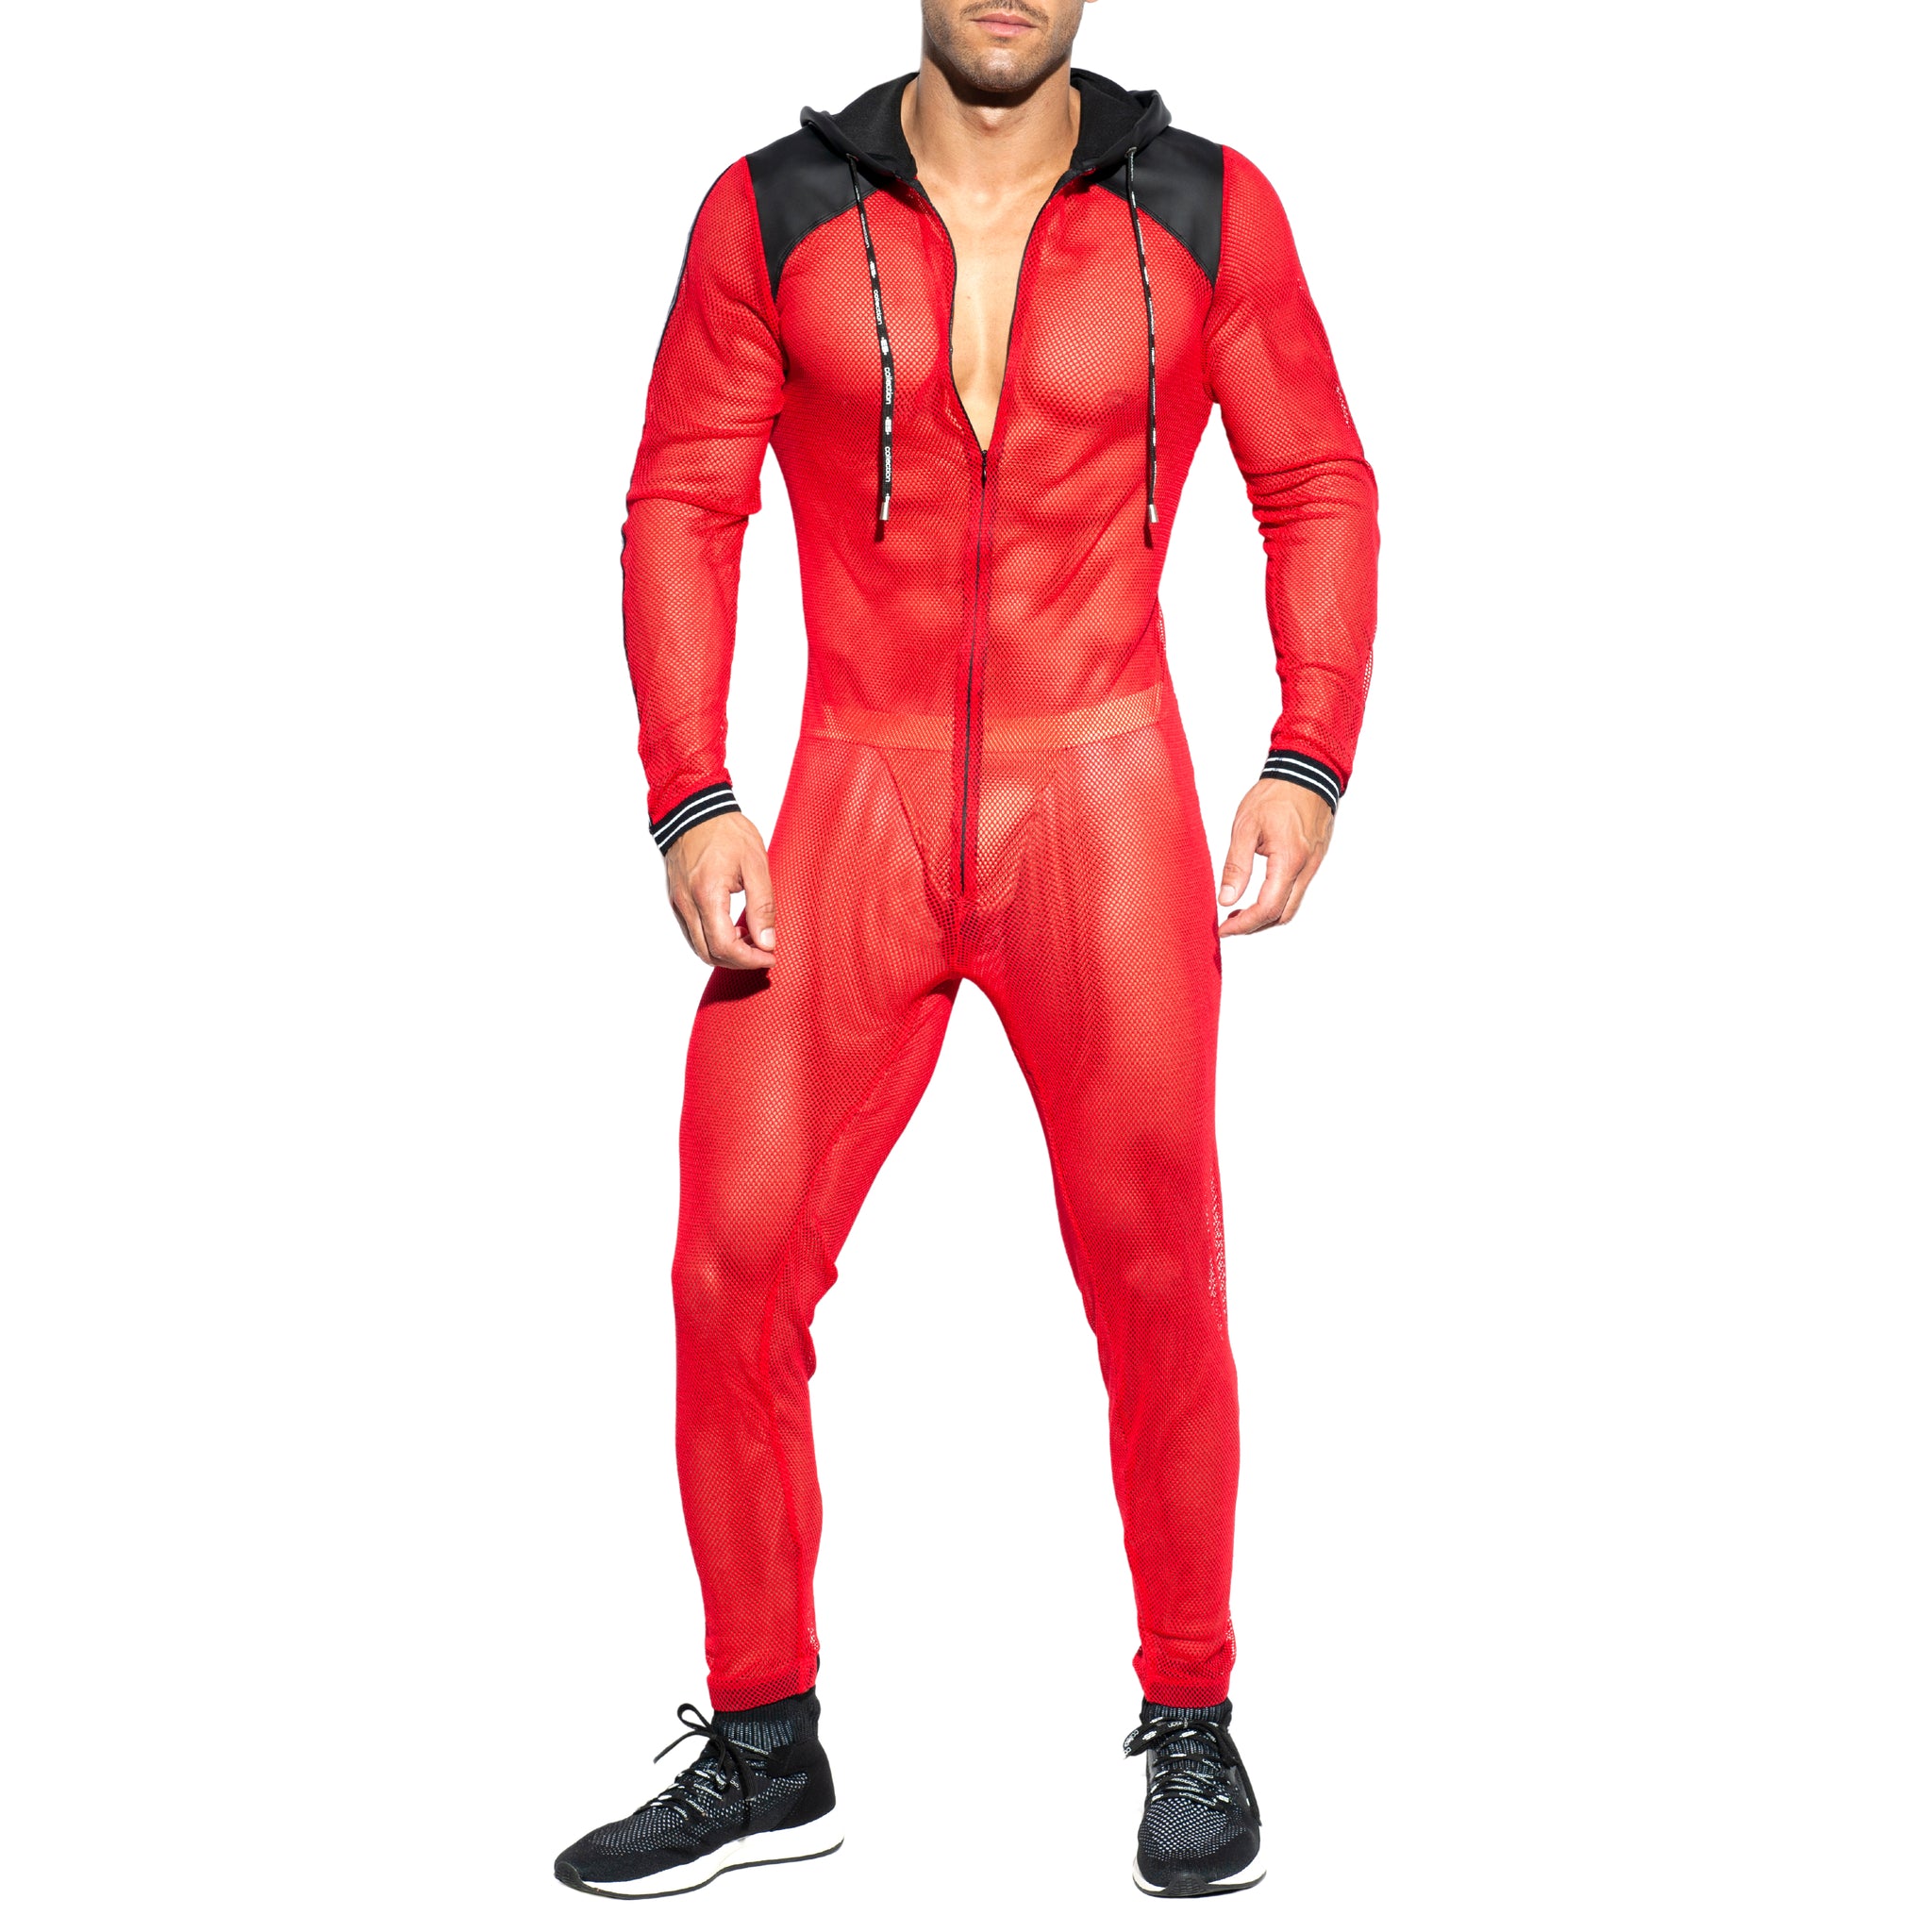 ES Collection Dystopia Mesh Suit Red SP205